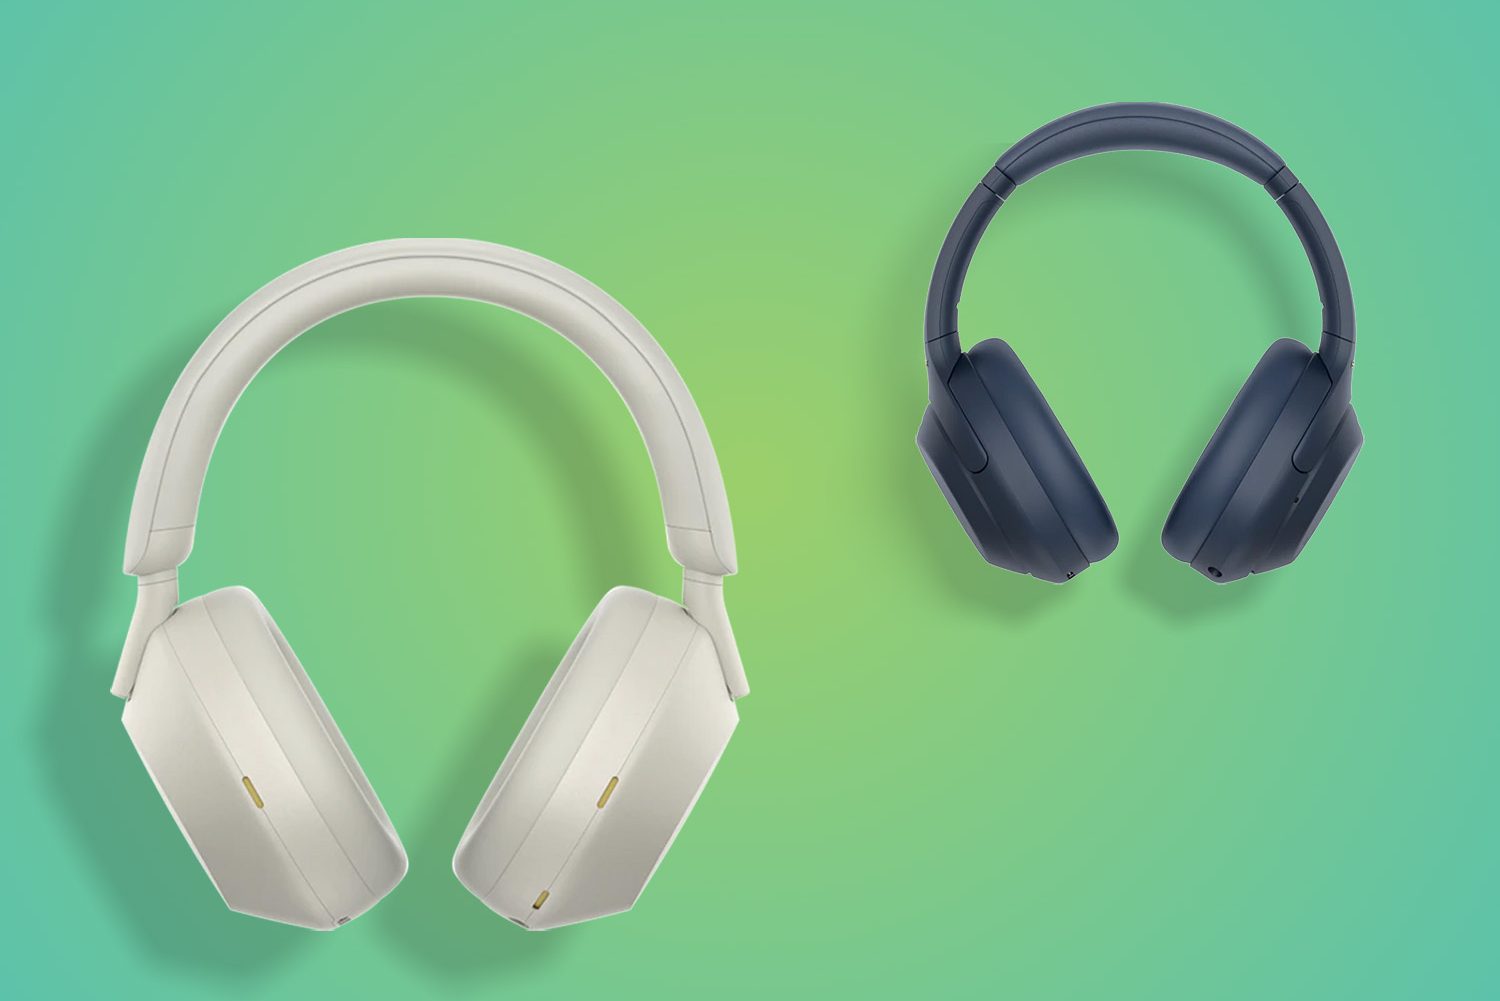 Sony WH-1000XM4 vs. WH-1000XM3: Which noise-cancelling headphones win?